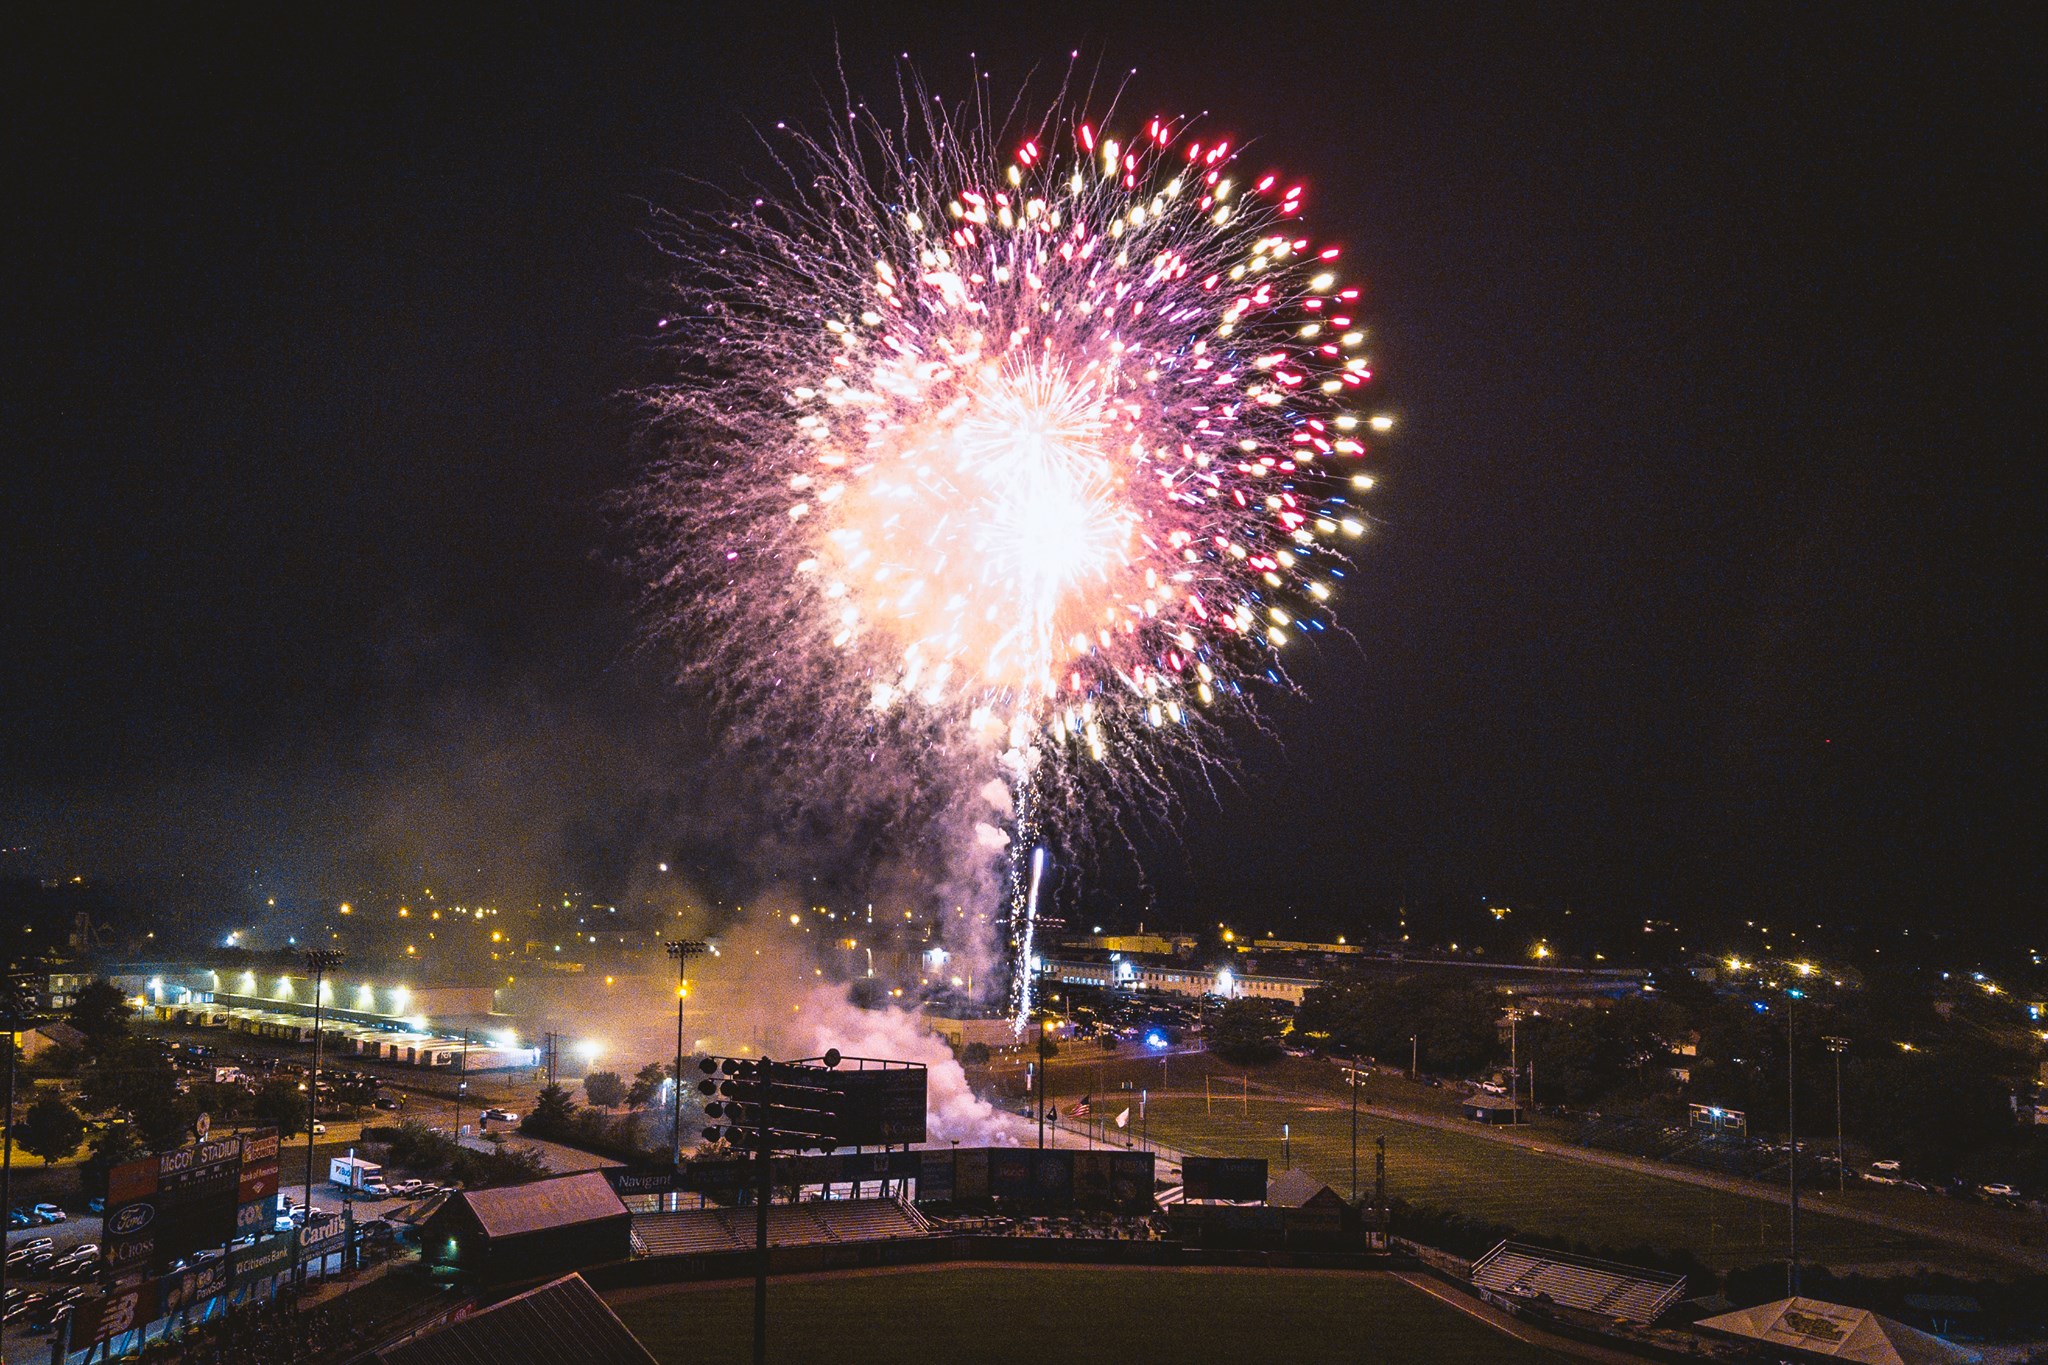 Three Fireworks Shows & McCoy Stadium Replica Giveaway this Weekend!